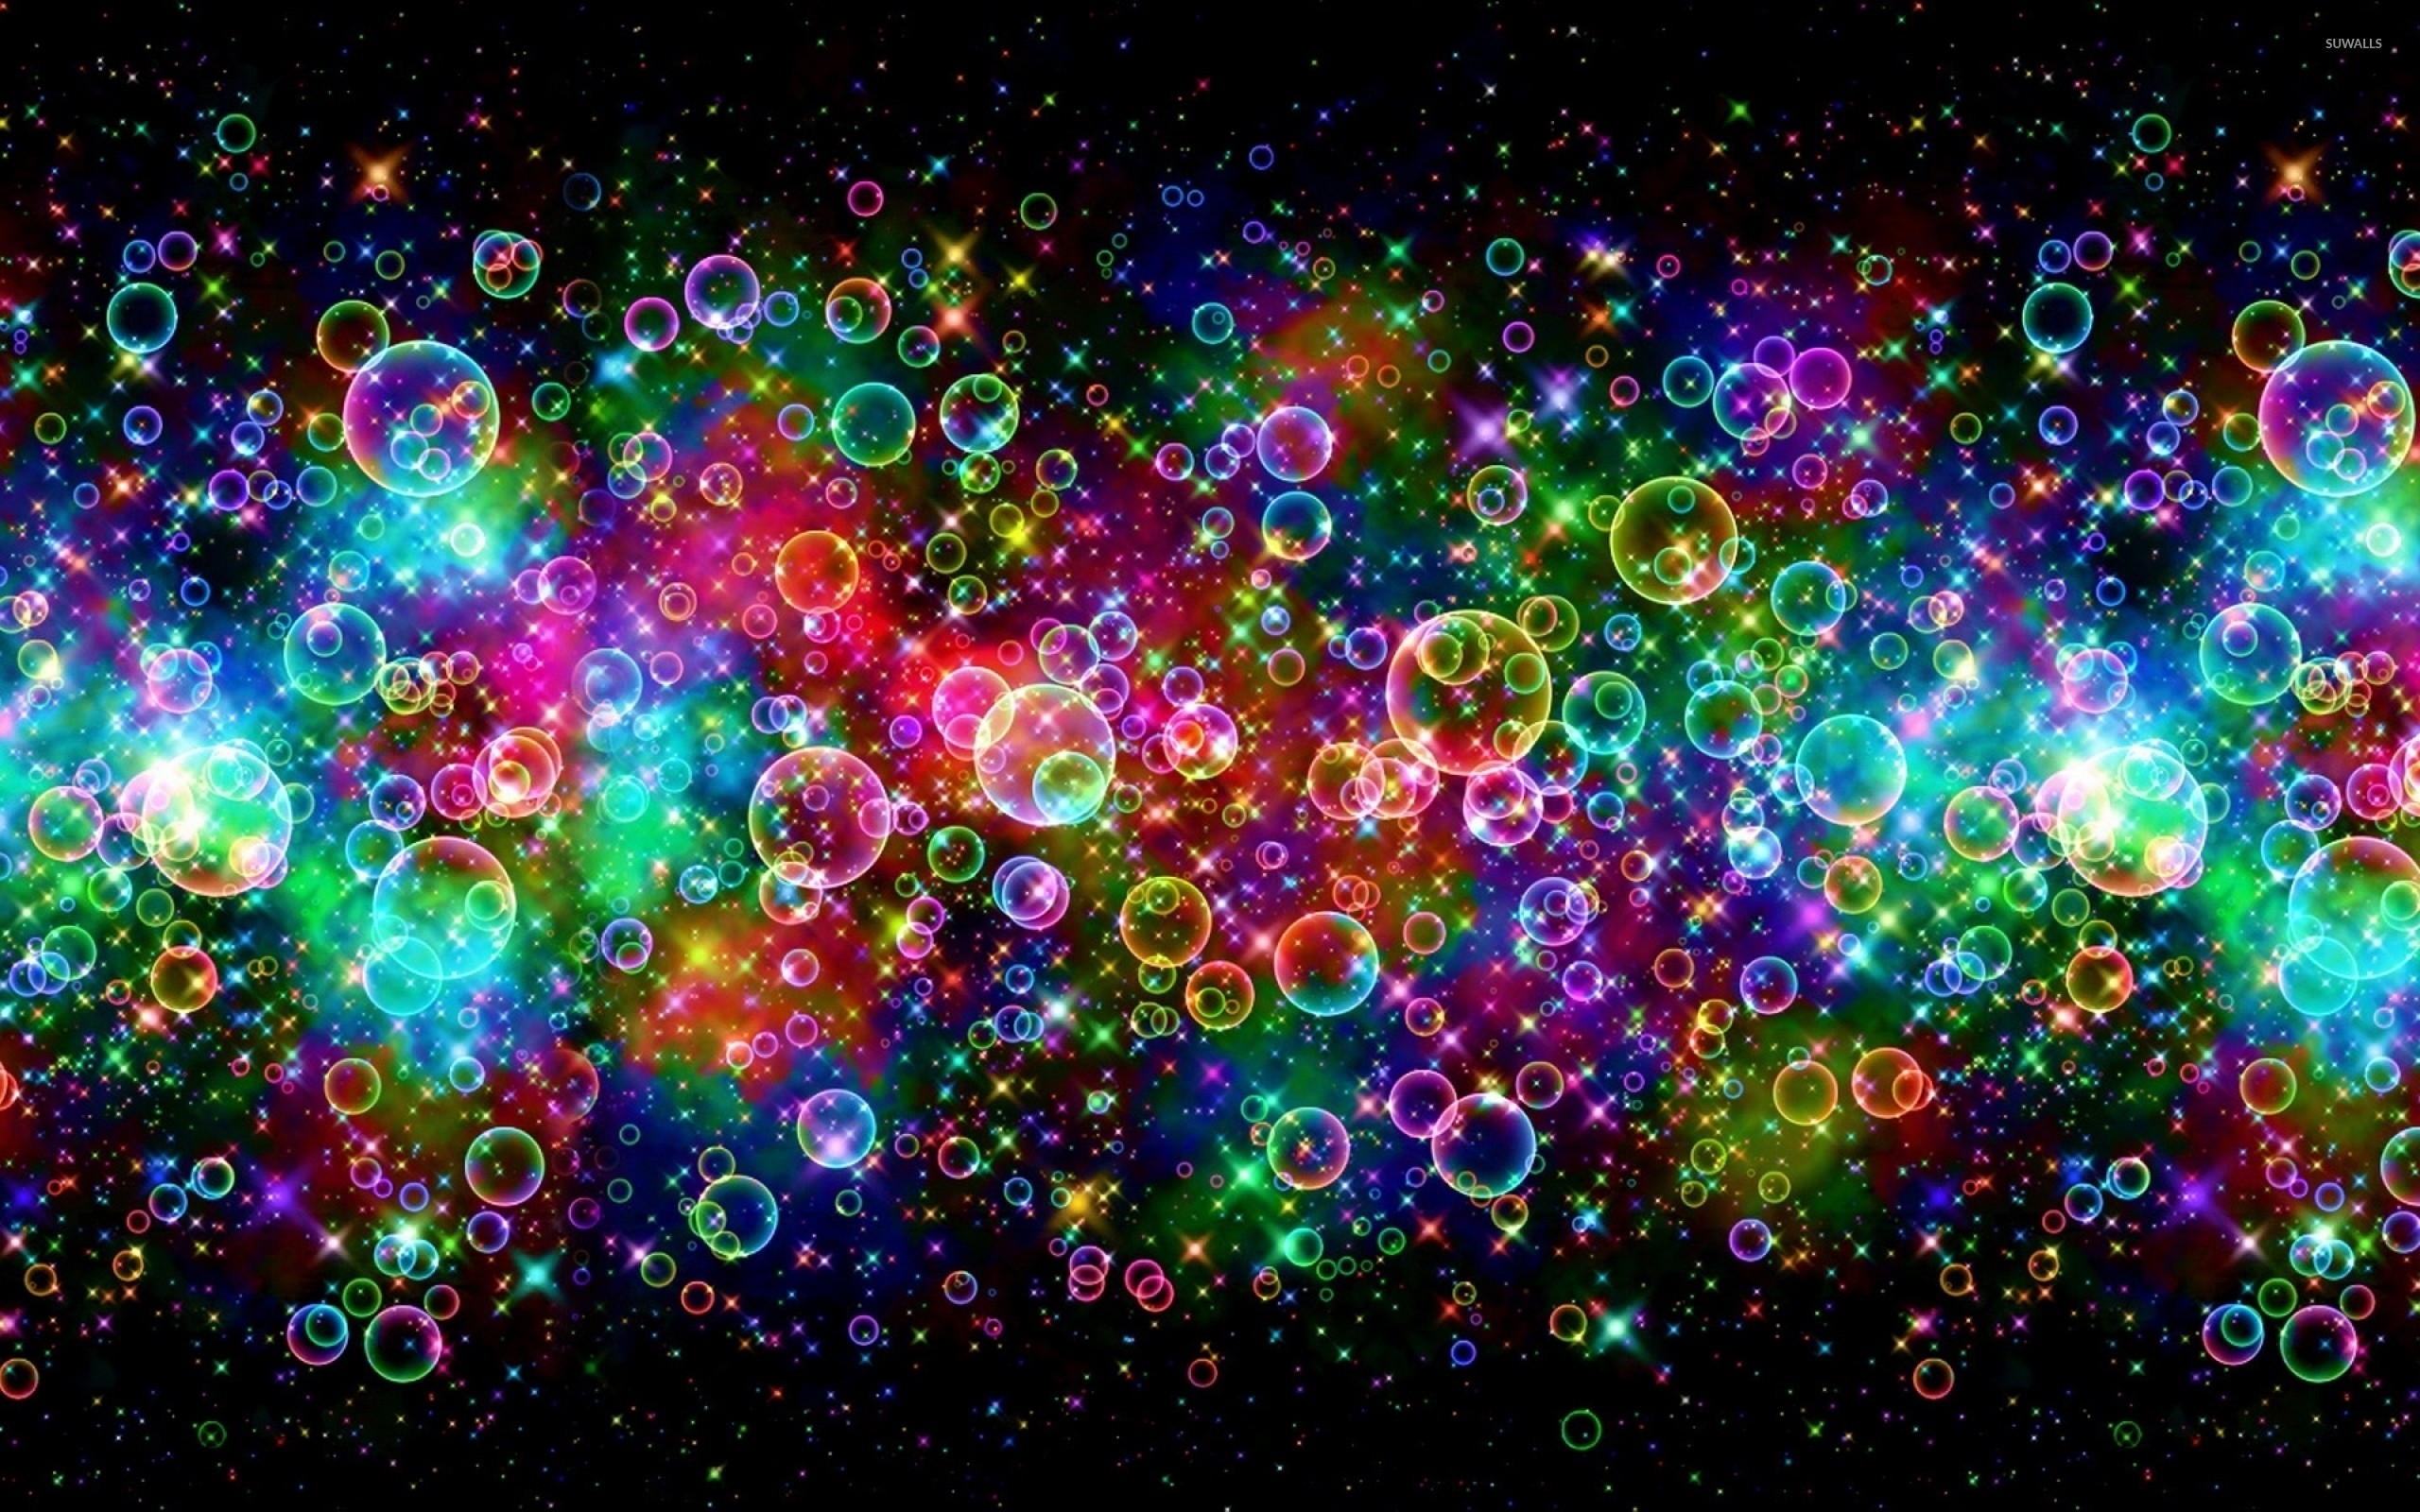 Bright colors reflected on the bubbles wallpaper jpg